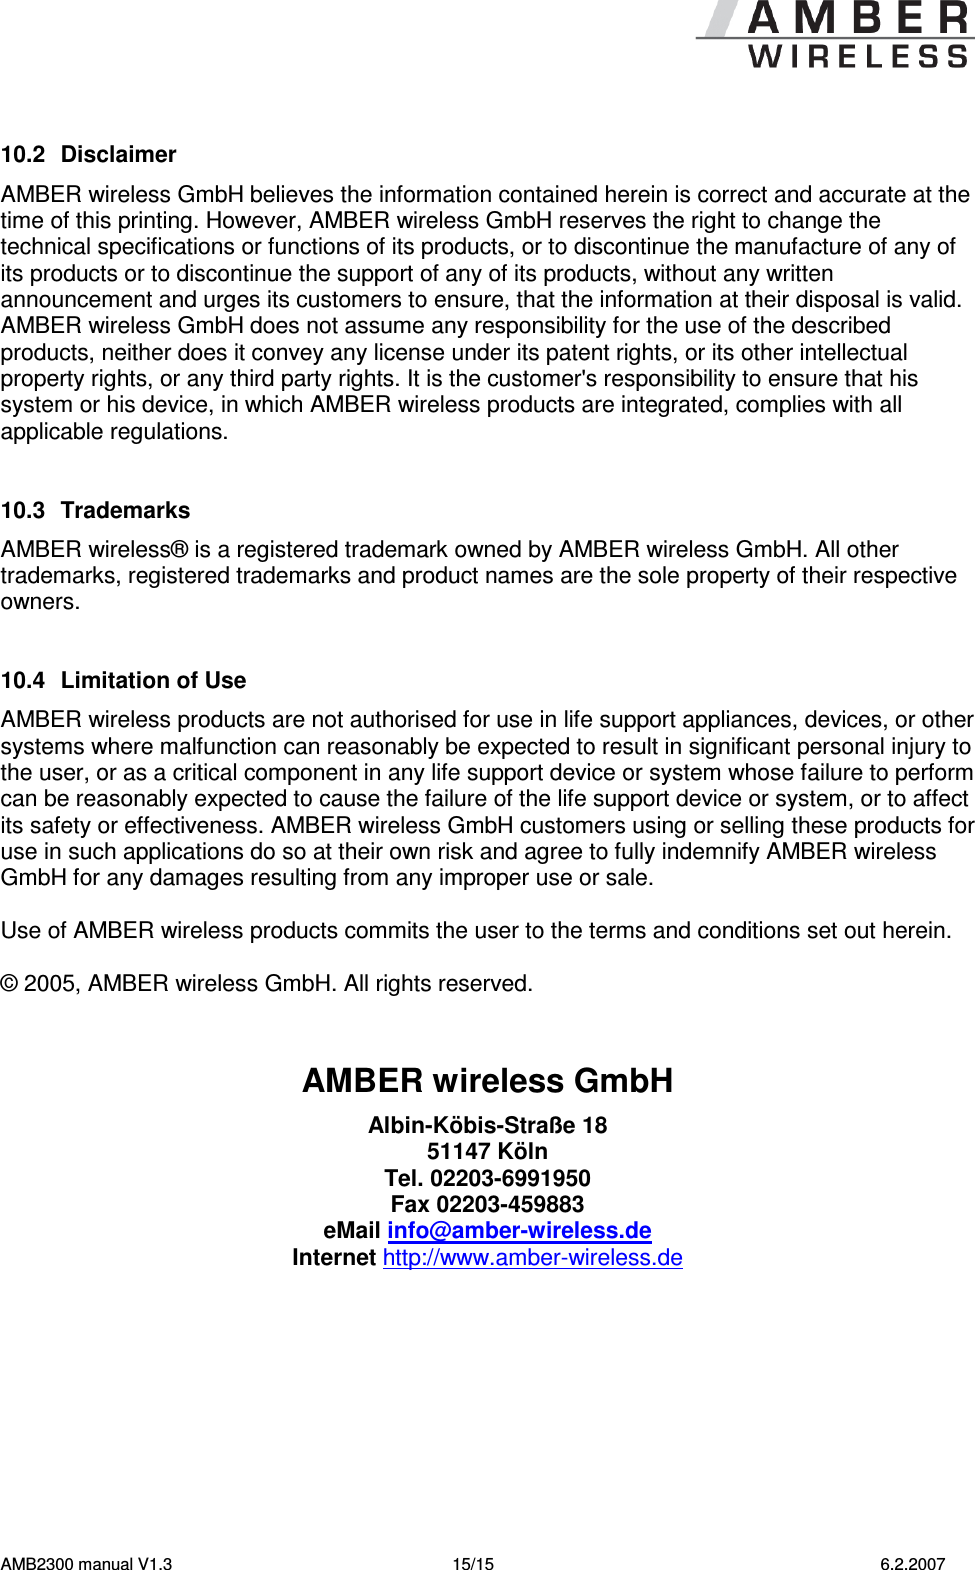   AMB2300 manual V1.3  15/15  6.2.2007  10.2  Disclaimer AMBER wireless GmbH believes the information contained herein is correct and accurate at the time of this printing. However, AMBER wireless GmbH reserves the right to change the technical specifications or functions of its products, or to discontinue the manufacture of any of its products or to discontinue the support of any of its products, without any written announcement and urges its customers to ensure, that the information at their disposal is valid. AMBER wireless GmbH does not assume any responsibility for the use of the described products, neither does it convey any license under its patent rights, or its other intellectual property rights, or any third party rights. It is the customer&apos;s responsibility to ensure that his system or his device, in which AMBER wireless products are integrated, complies with all applicable regulations.   10.3  Trademarks AMBER wireless® is a registered trademark owned by AMBER wireless GmbH. All other trademarks, registered trademarks and product names are the sole property of their respective owners.   10.4  Limitation of Use AMBER wireless products are not authorised for use in life support appliances, devices, or other systems where malfunction can reasonably be expected to result in significant personal injury to the user, or as a critical component in any life support device or system whose failure to perform can be reasonably expected to cause the failure of the life support device or system, or to affect its safety or effectiveness. AMBER wireless GmbH customers using or selling these products for use in such applications do so at their own risk and agree to fully indemnify AMBER wireless GmbH for any damages resulting from any improper use or sale.  Use of AMBER wireless products commits the user to the terms and conditions set out herein.  © 2005, AMBER wireless GmbH. All rights reserved.   AMBER wireless GmbH Albin-Köbis-Straße 18 51147 Köln Tel. 02203-6991950 Fax 02203-459883 eMail info@amber-wireless.de Internet http://www.amber-wireless.de  